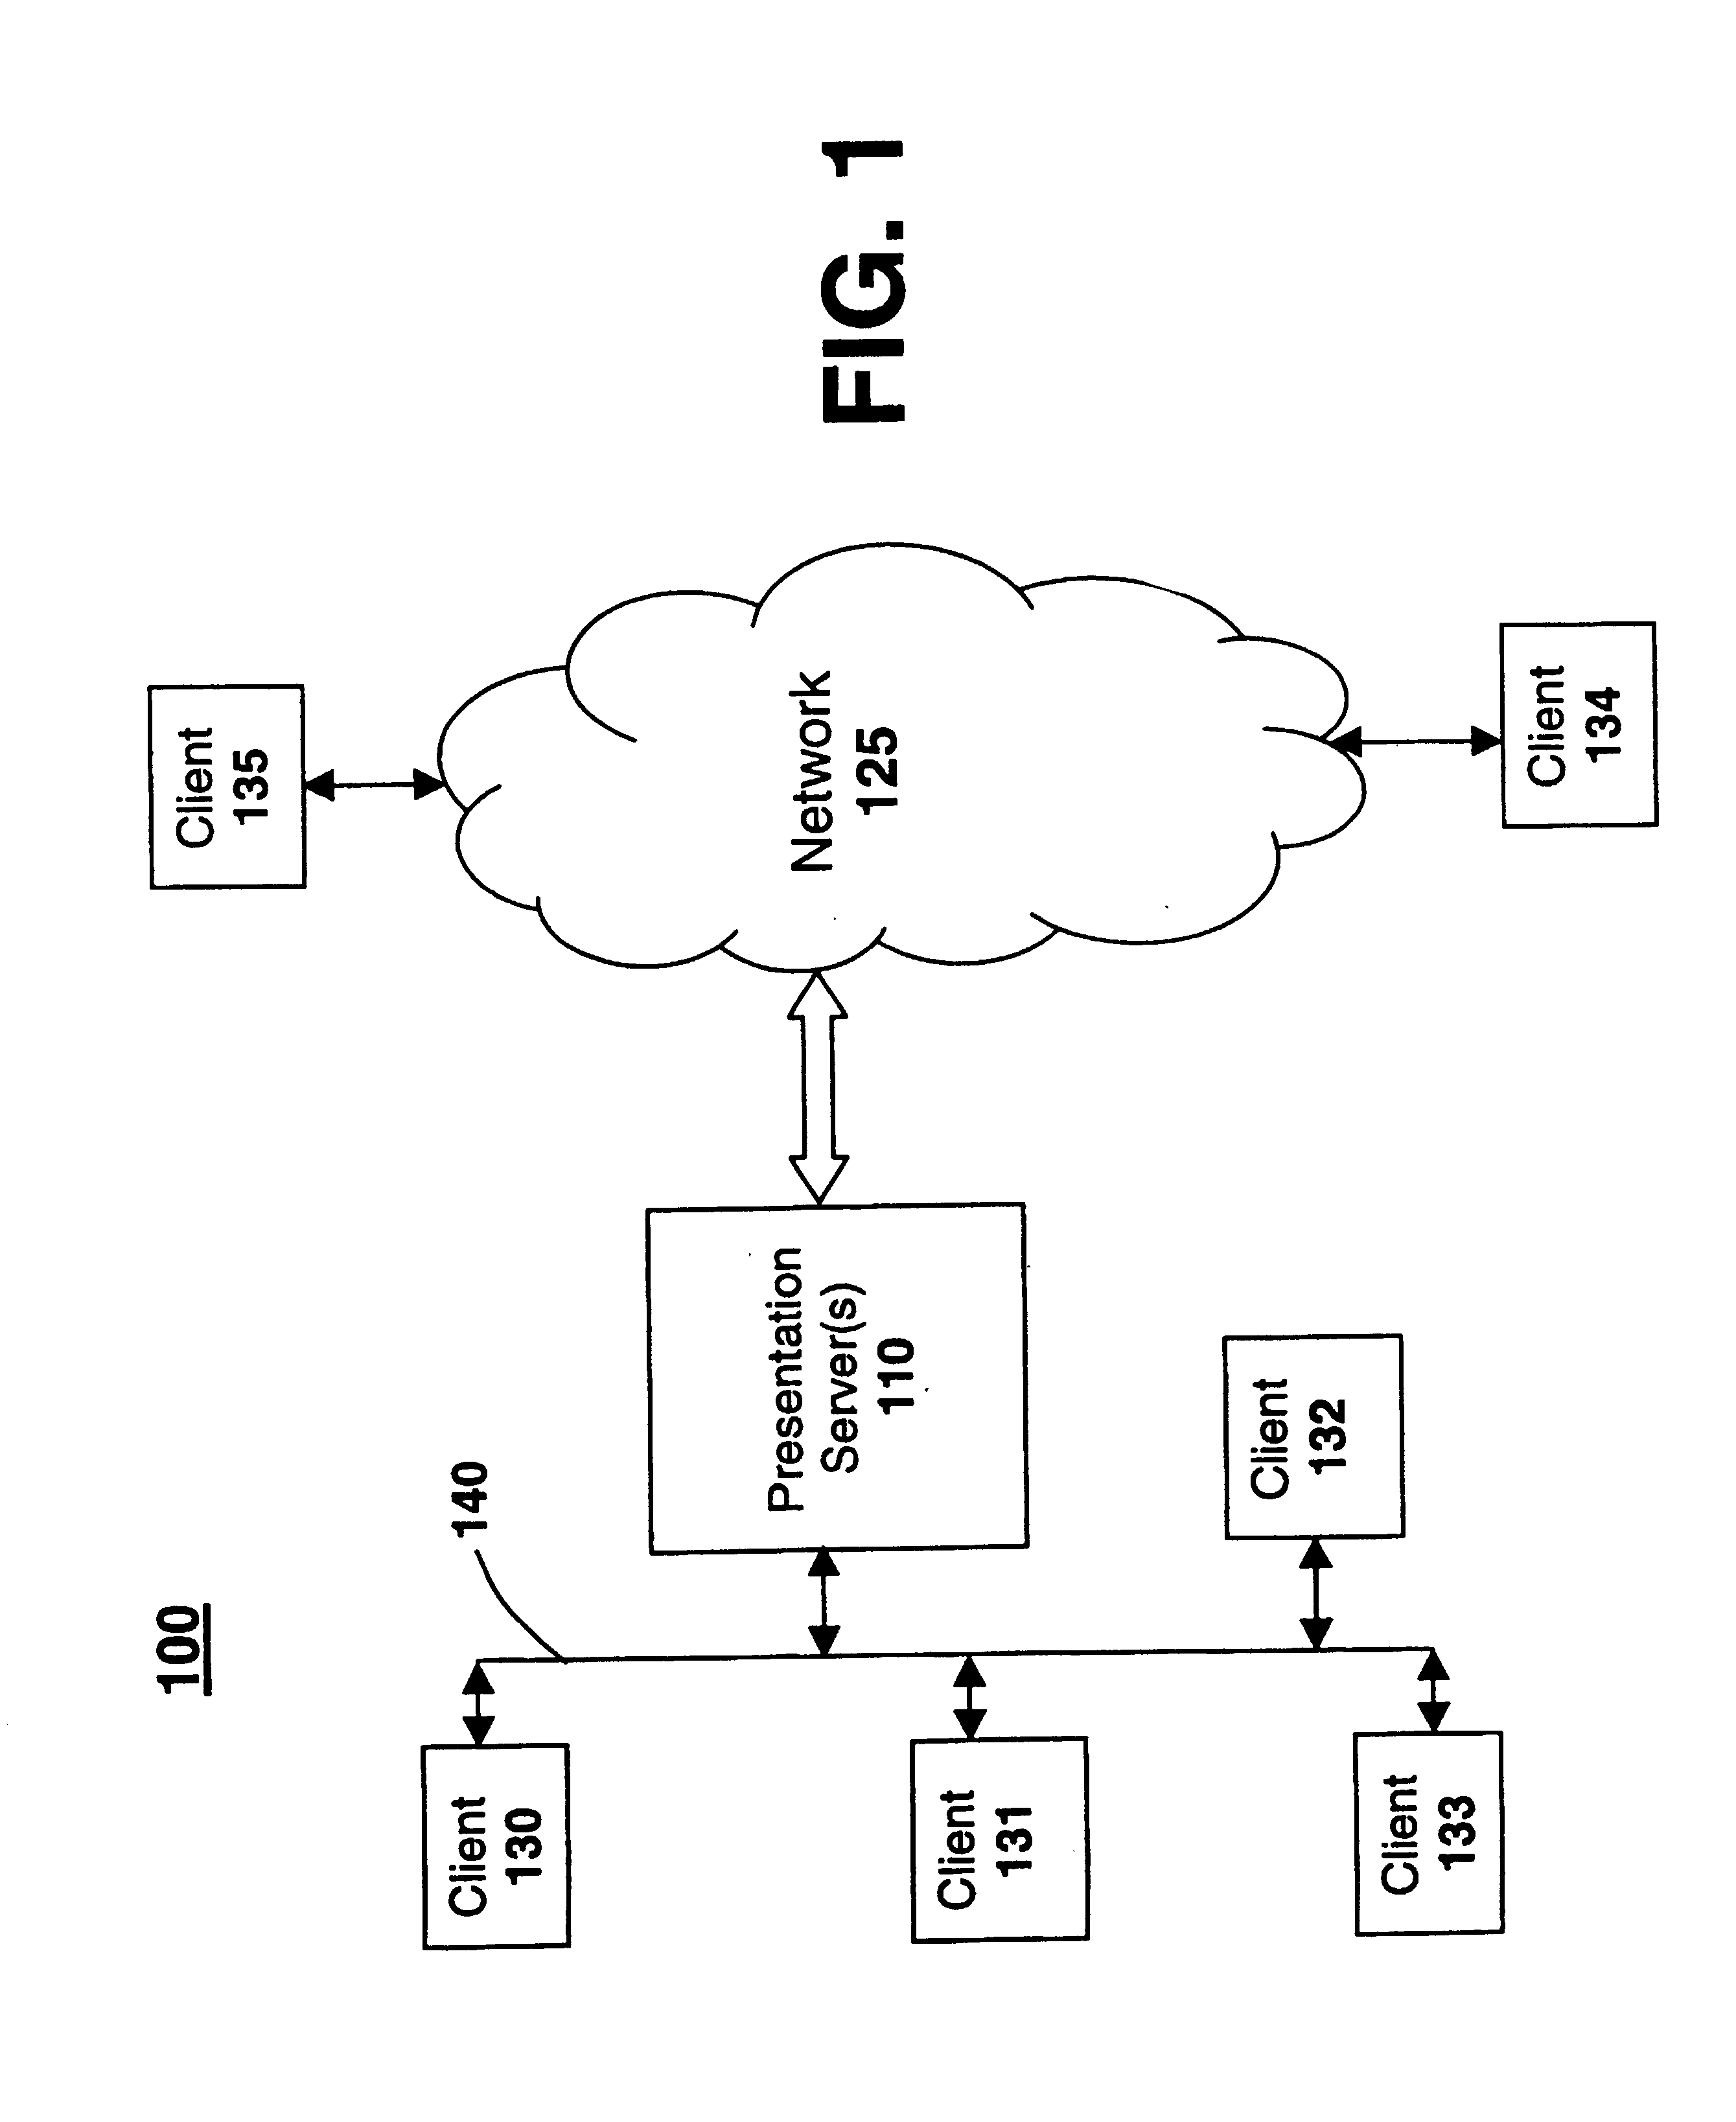 On-demand presentation graphical user interface